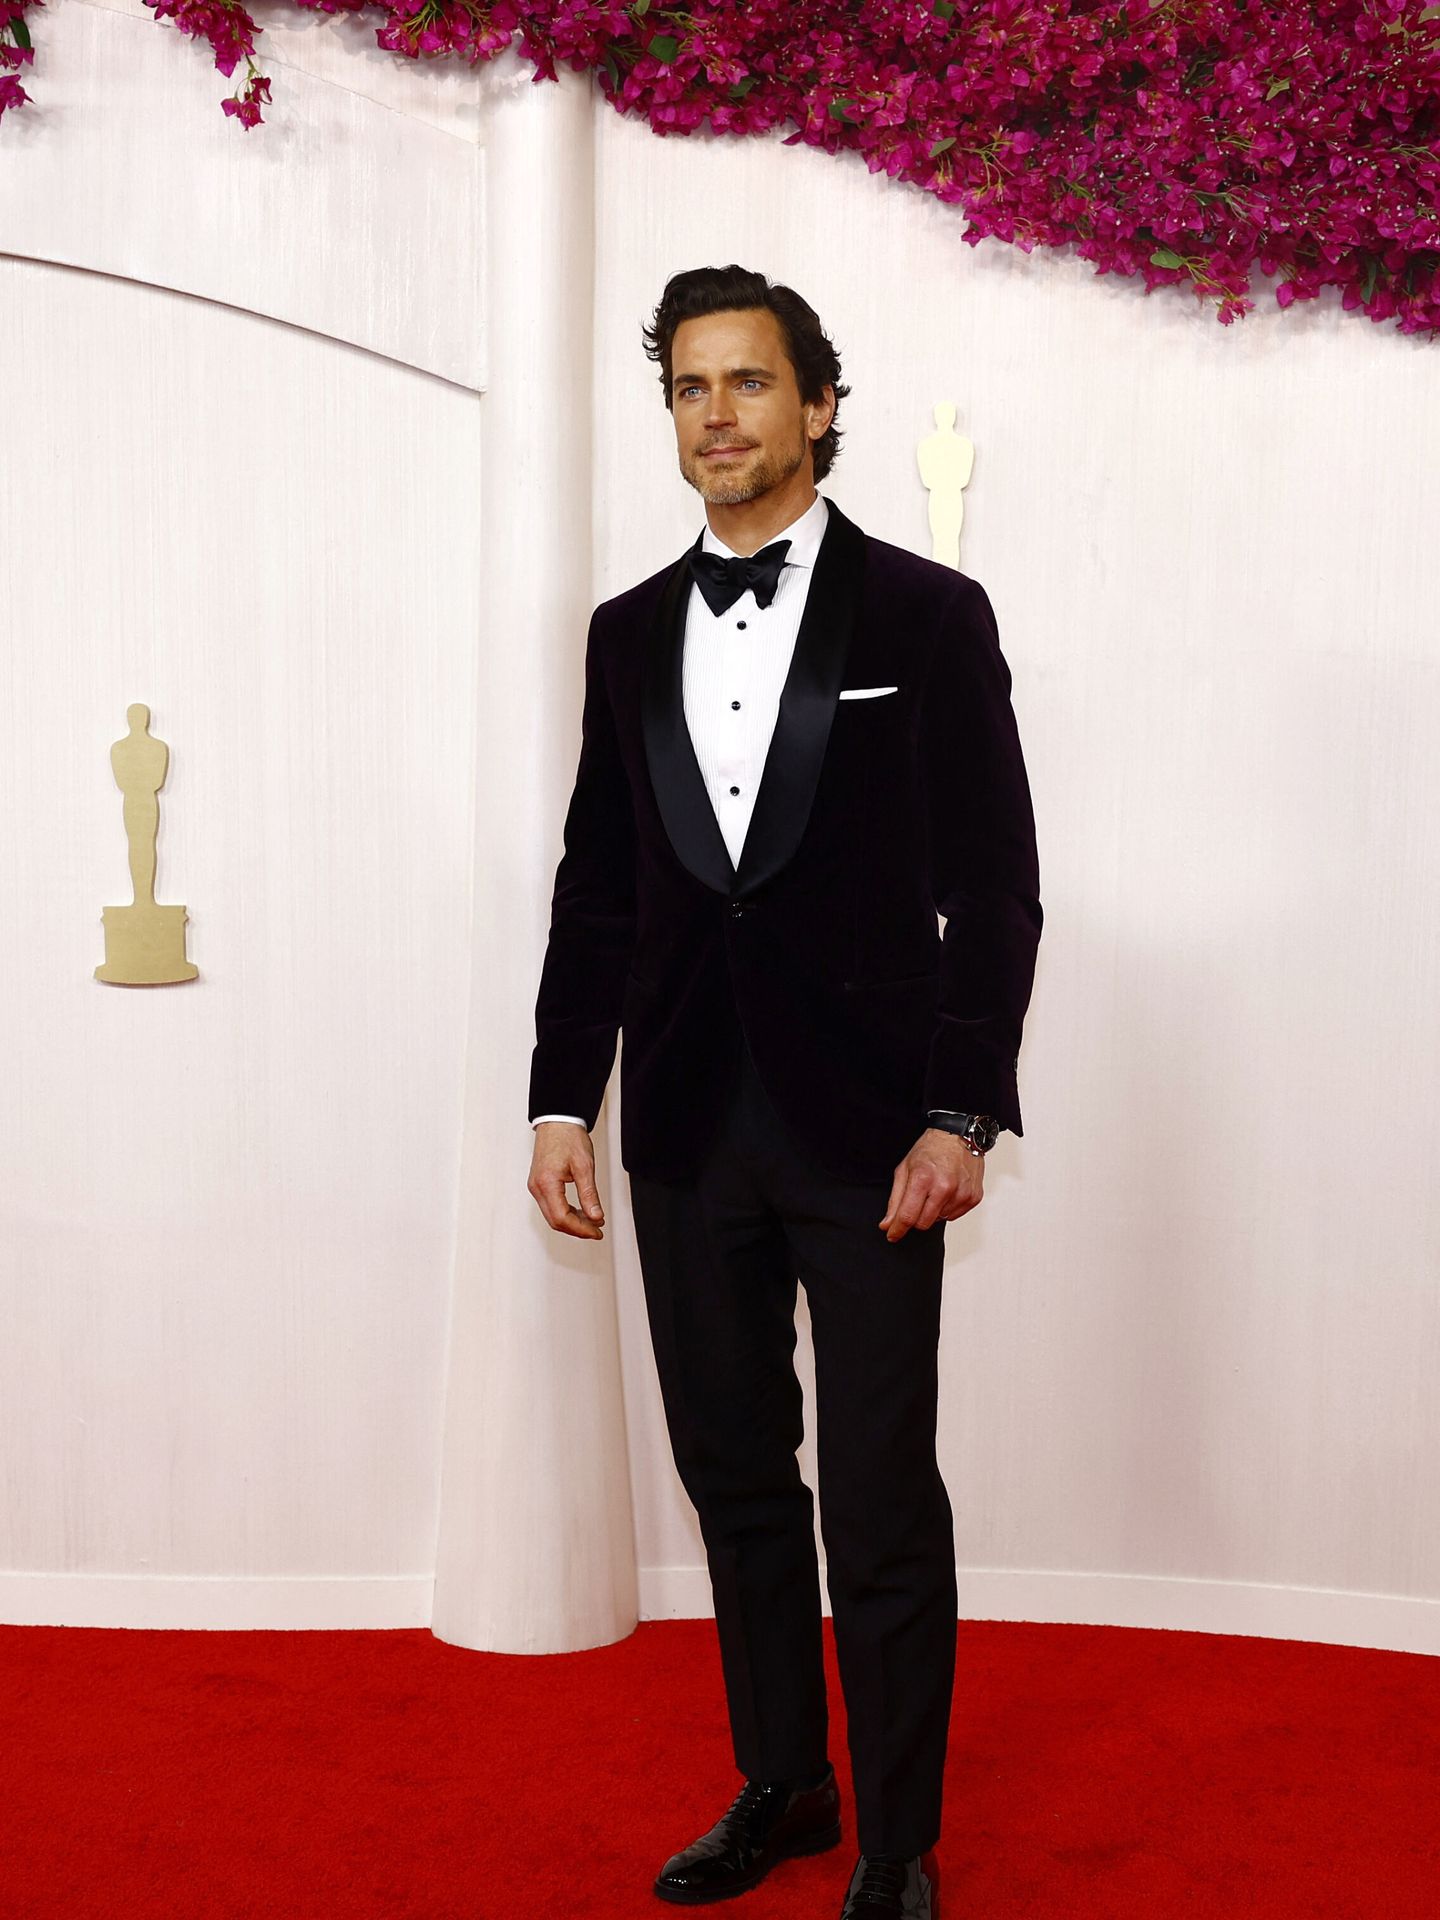 Matt Bomer poses on the red carpet during the Oscars arrivals at the 96th Academy Awards in Hollywood, Los Angeles, California, U.S., March 10, 2024. REUTERS Sarah Meyssonnier